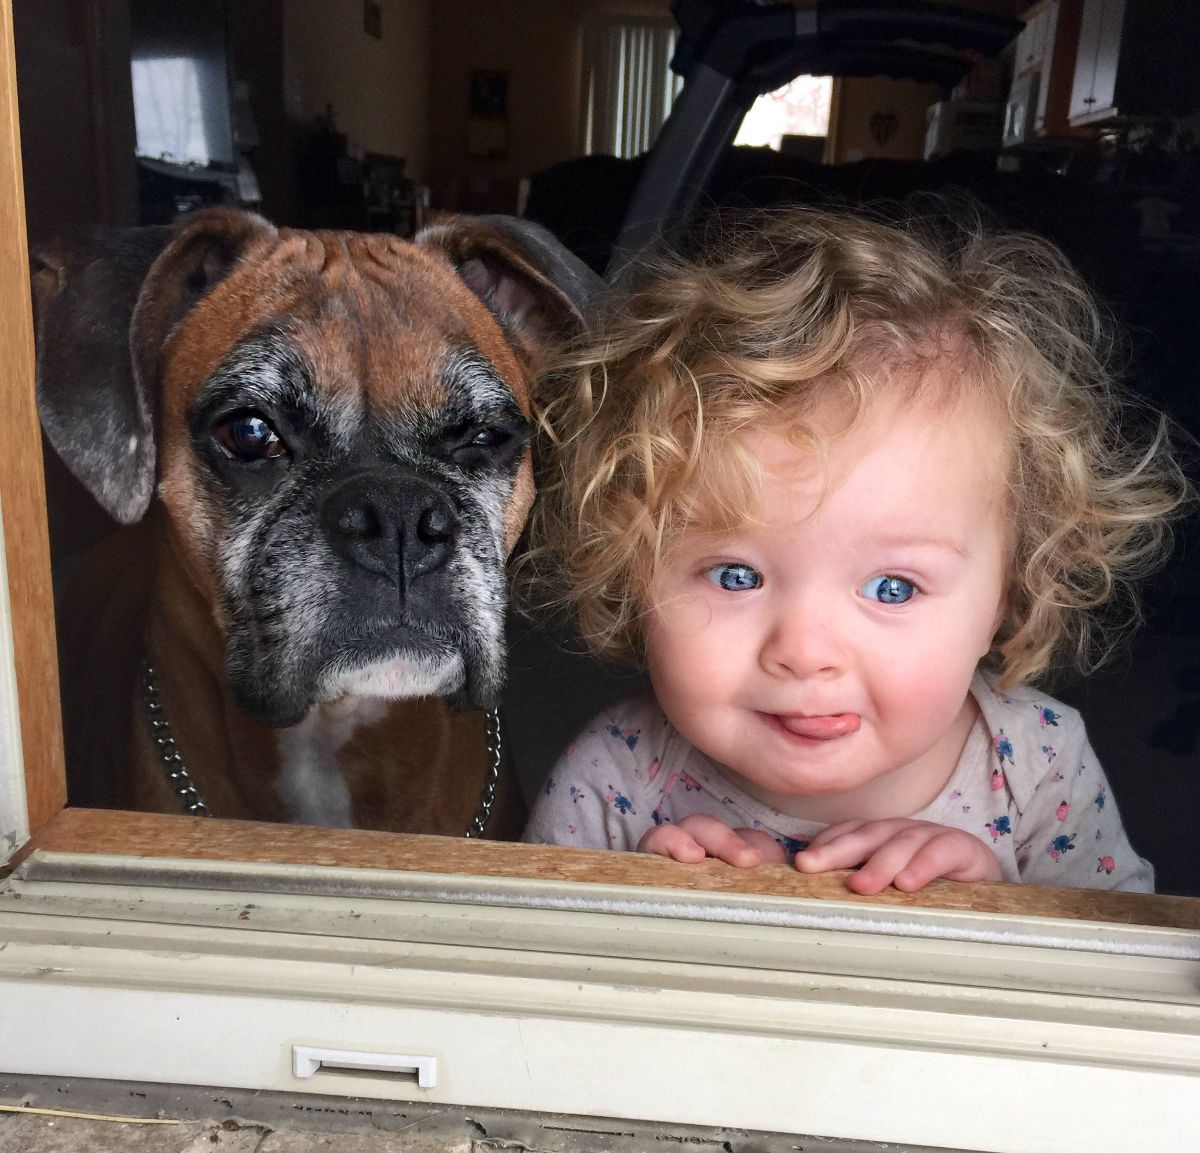 old brown and black dog looking out a window next to a little girl who has her tongue out